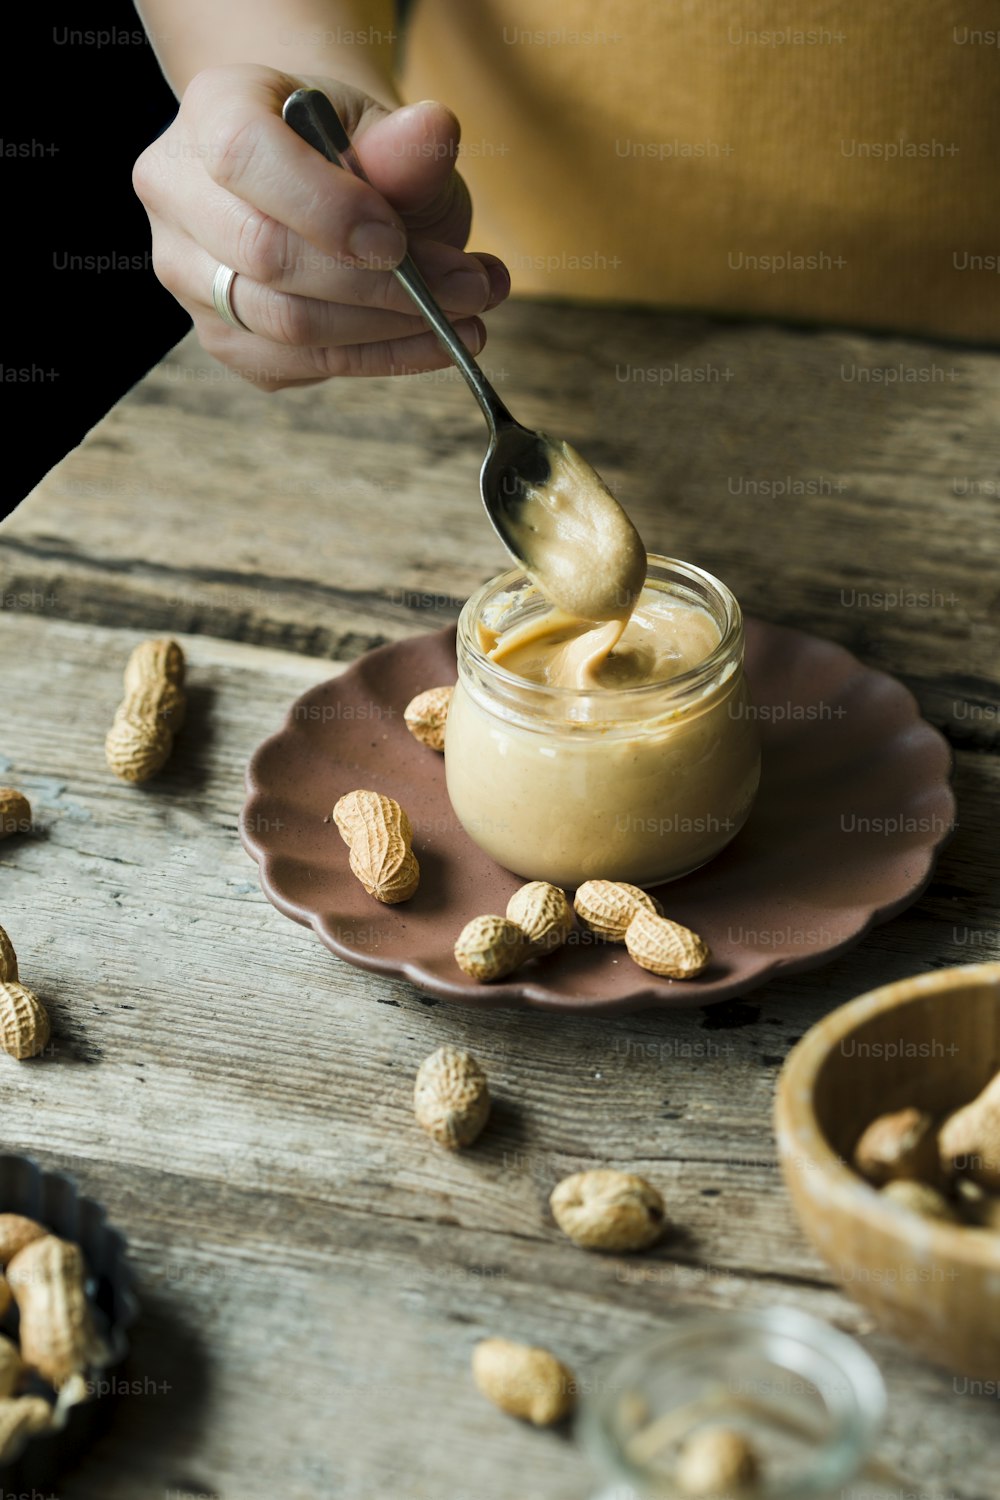 a person is dipping peanuts into a jar of peanut butter